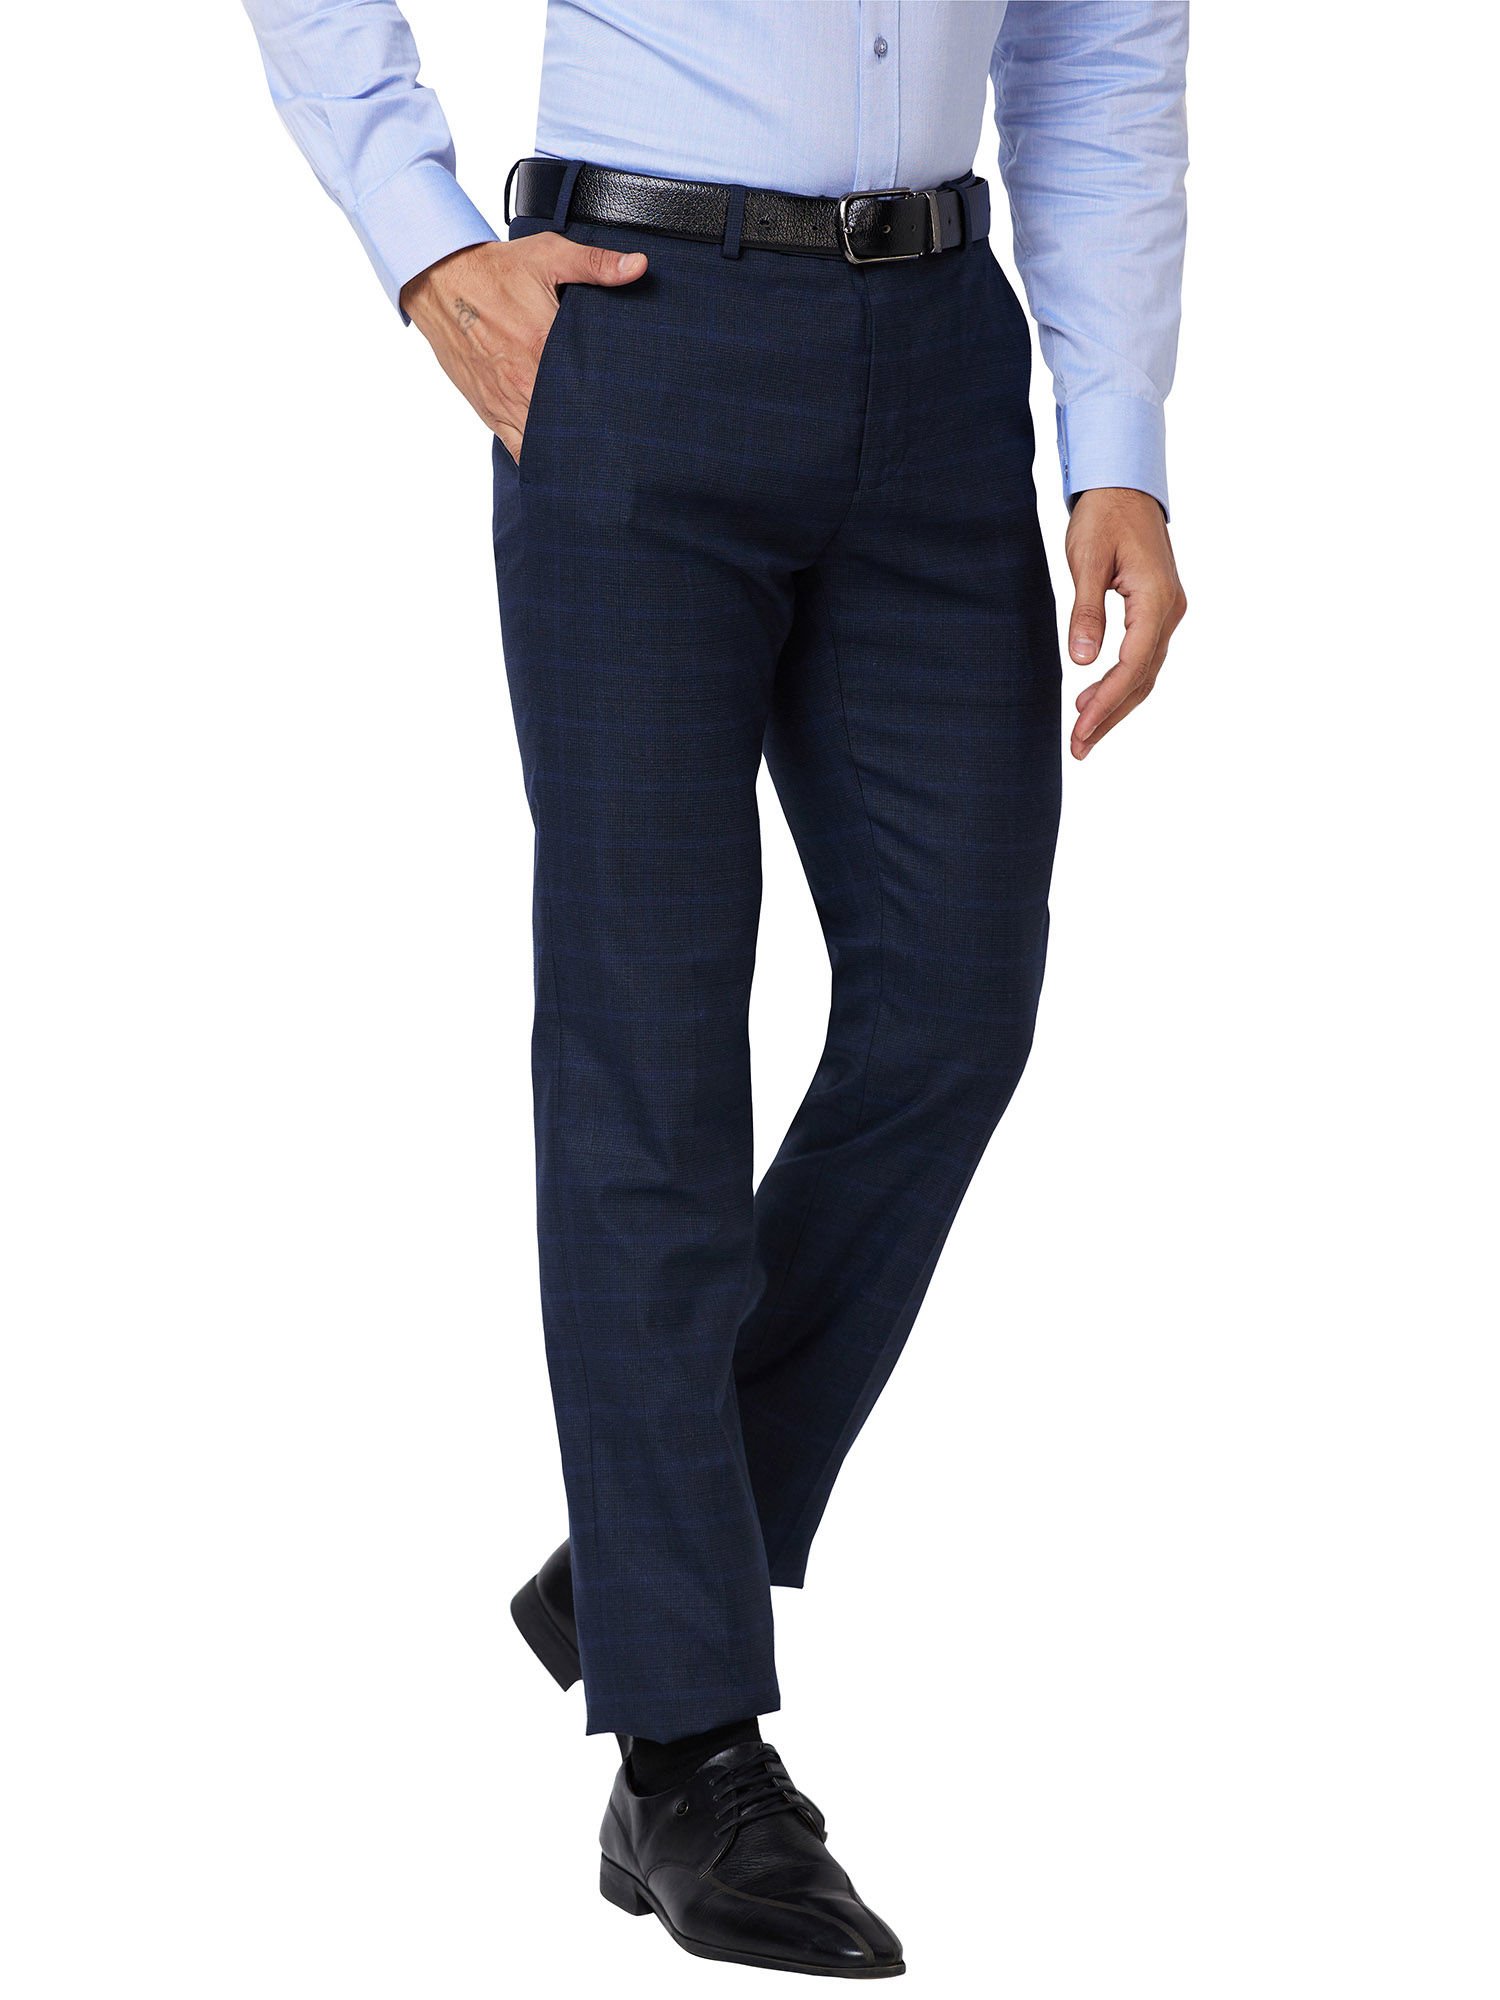 Light In Weight Mens Stretchable Comfort Dark Blue Relaxed Fit Formal  Trousers at Best Price in Basti | Westo Fashion